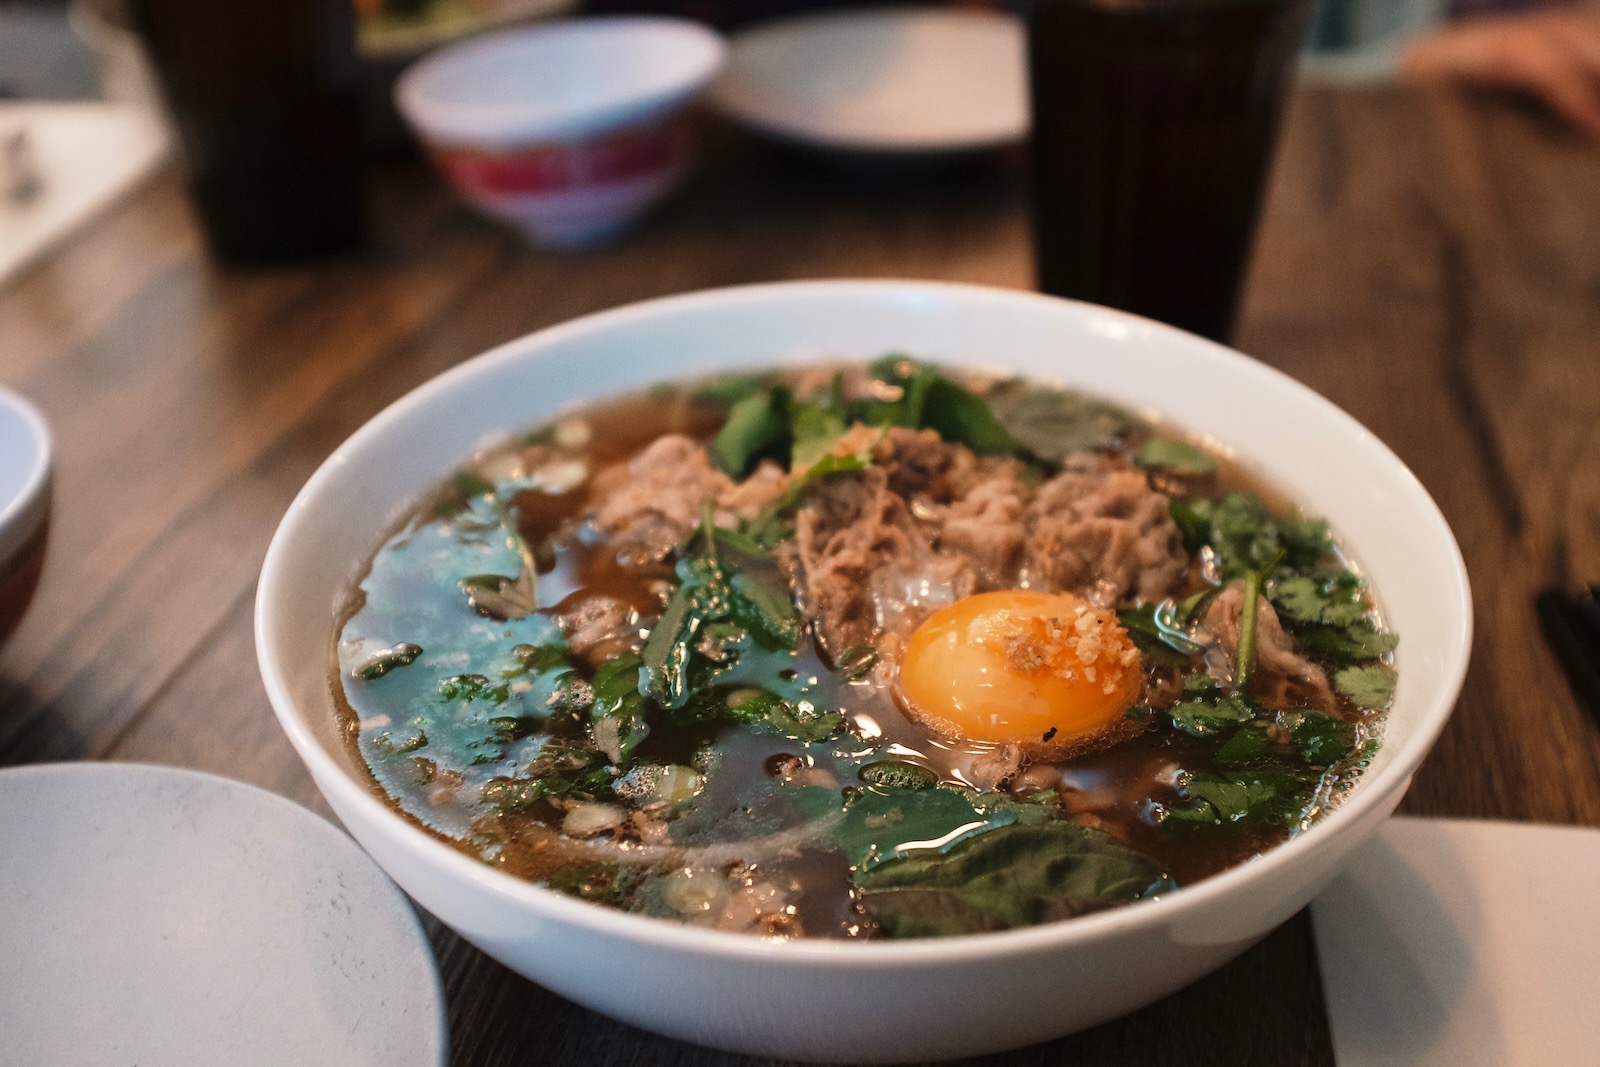 A bowl of beef noodle soup with an egg yolk delicately perched above beef and greens.